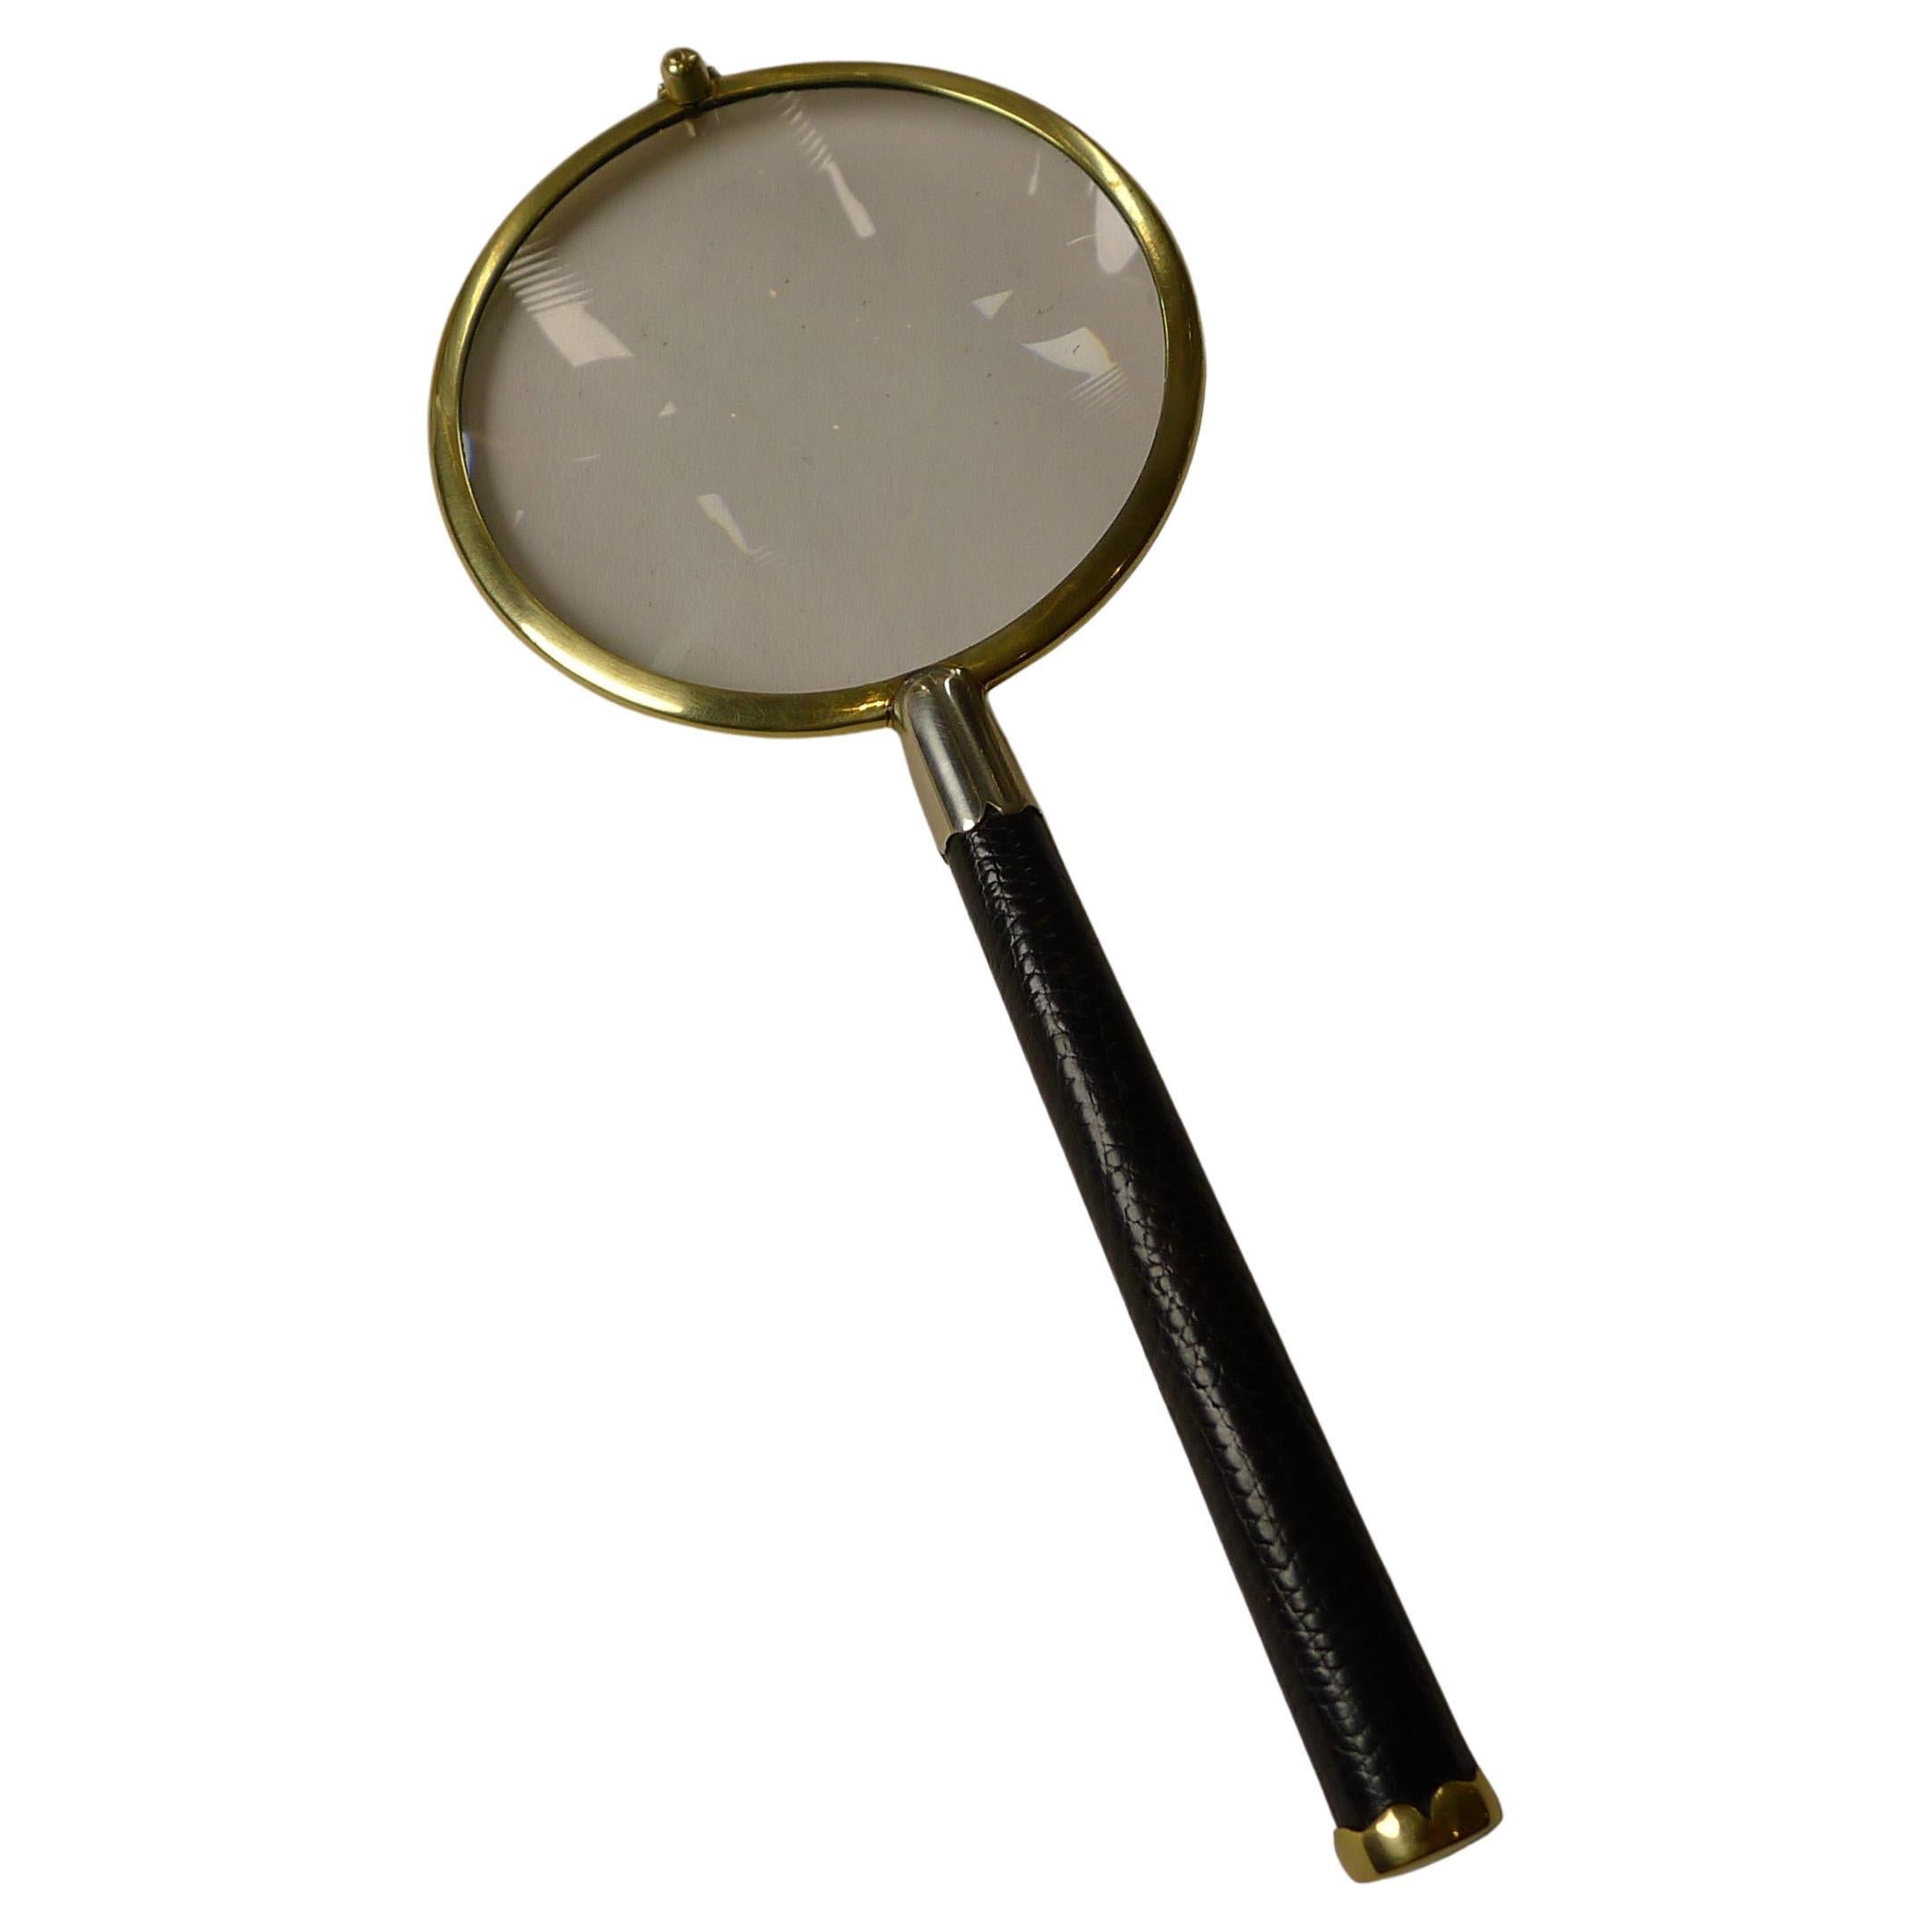 Small Brass and Glass Magnifying Lens, circa 1910 at 1stDibs